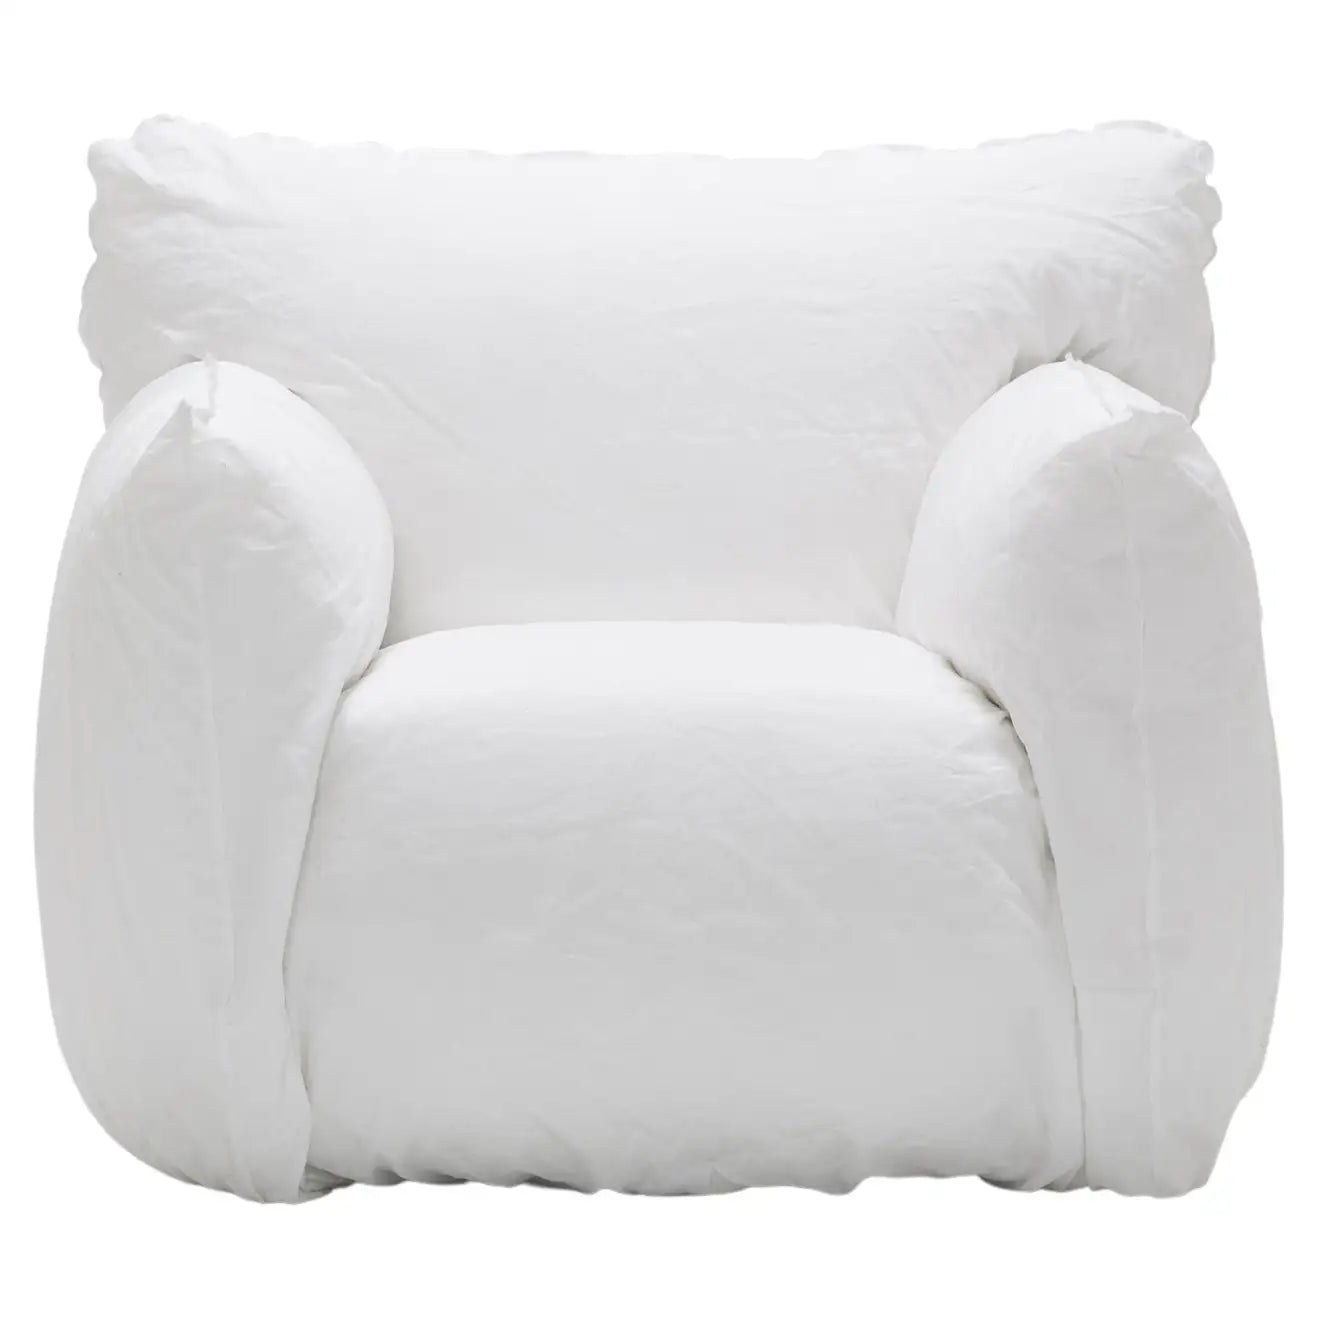 Gervasoni Nuvola 05 Lounge Chair in White Linen Upholstery by Paola Navone $3,900.00